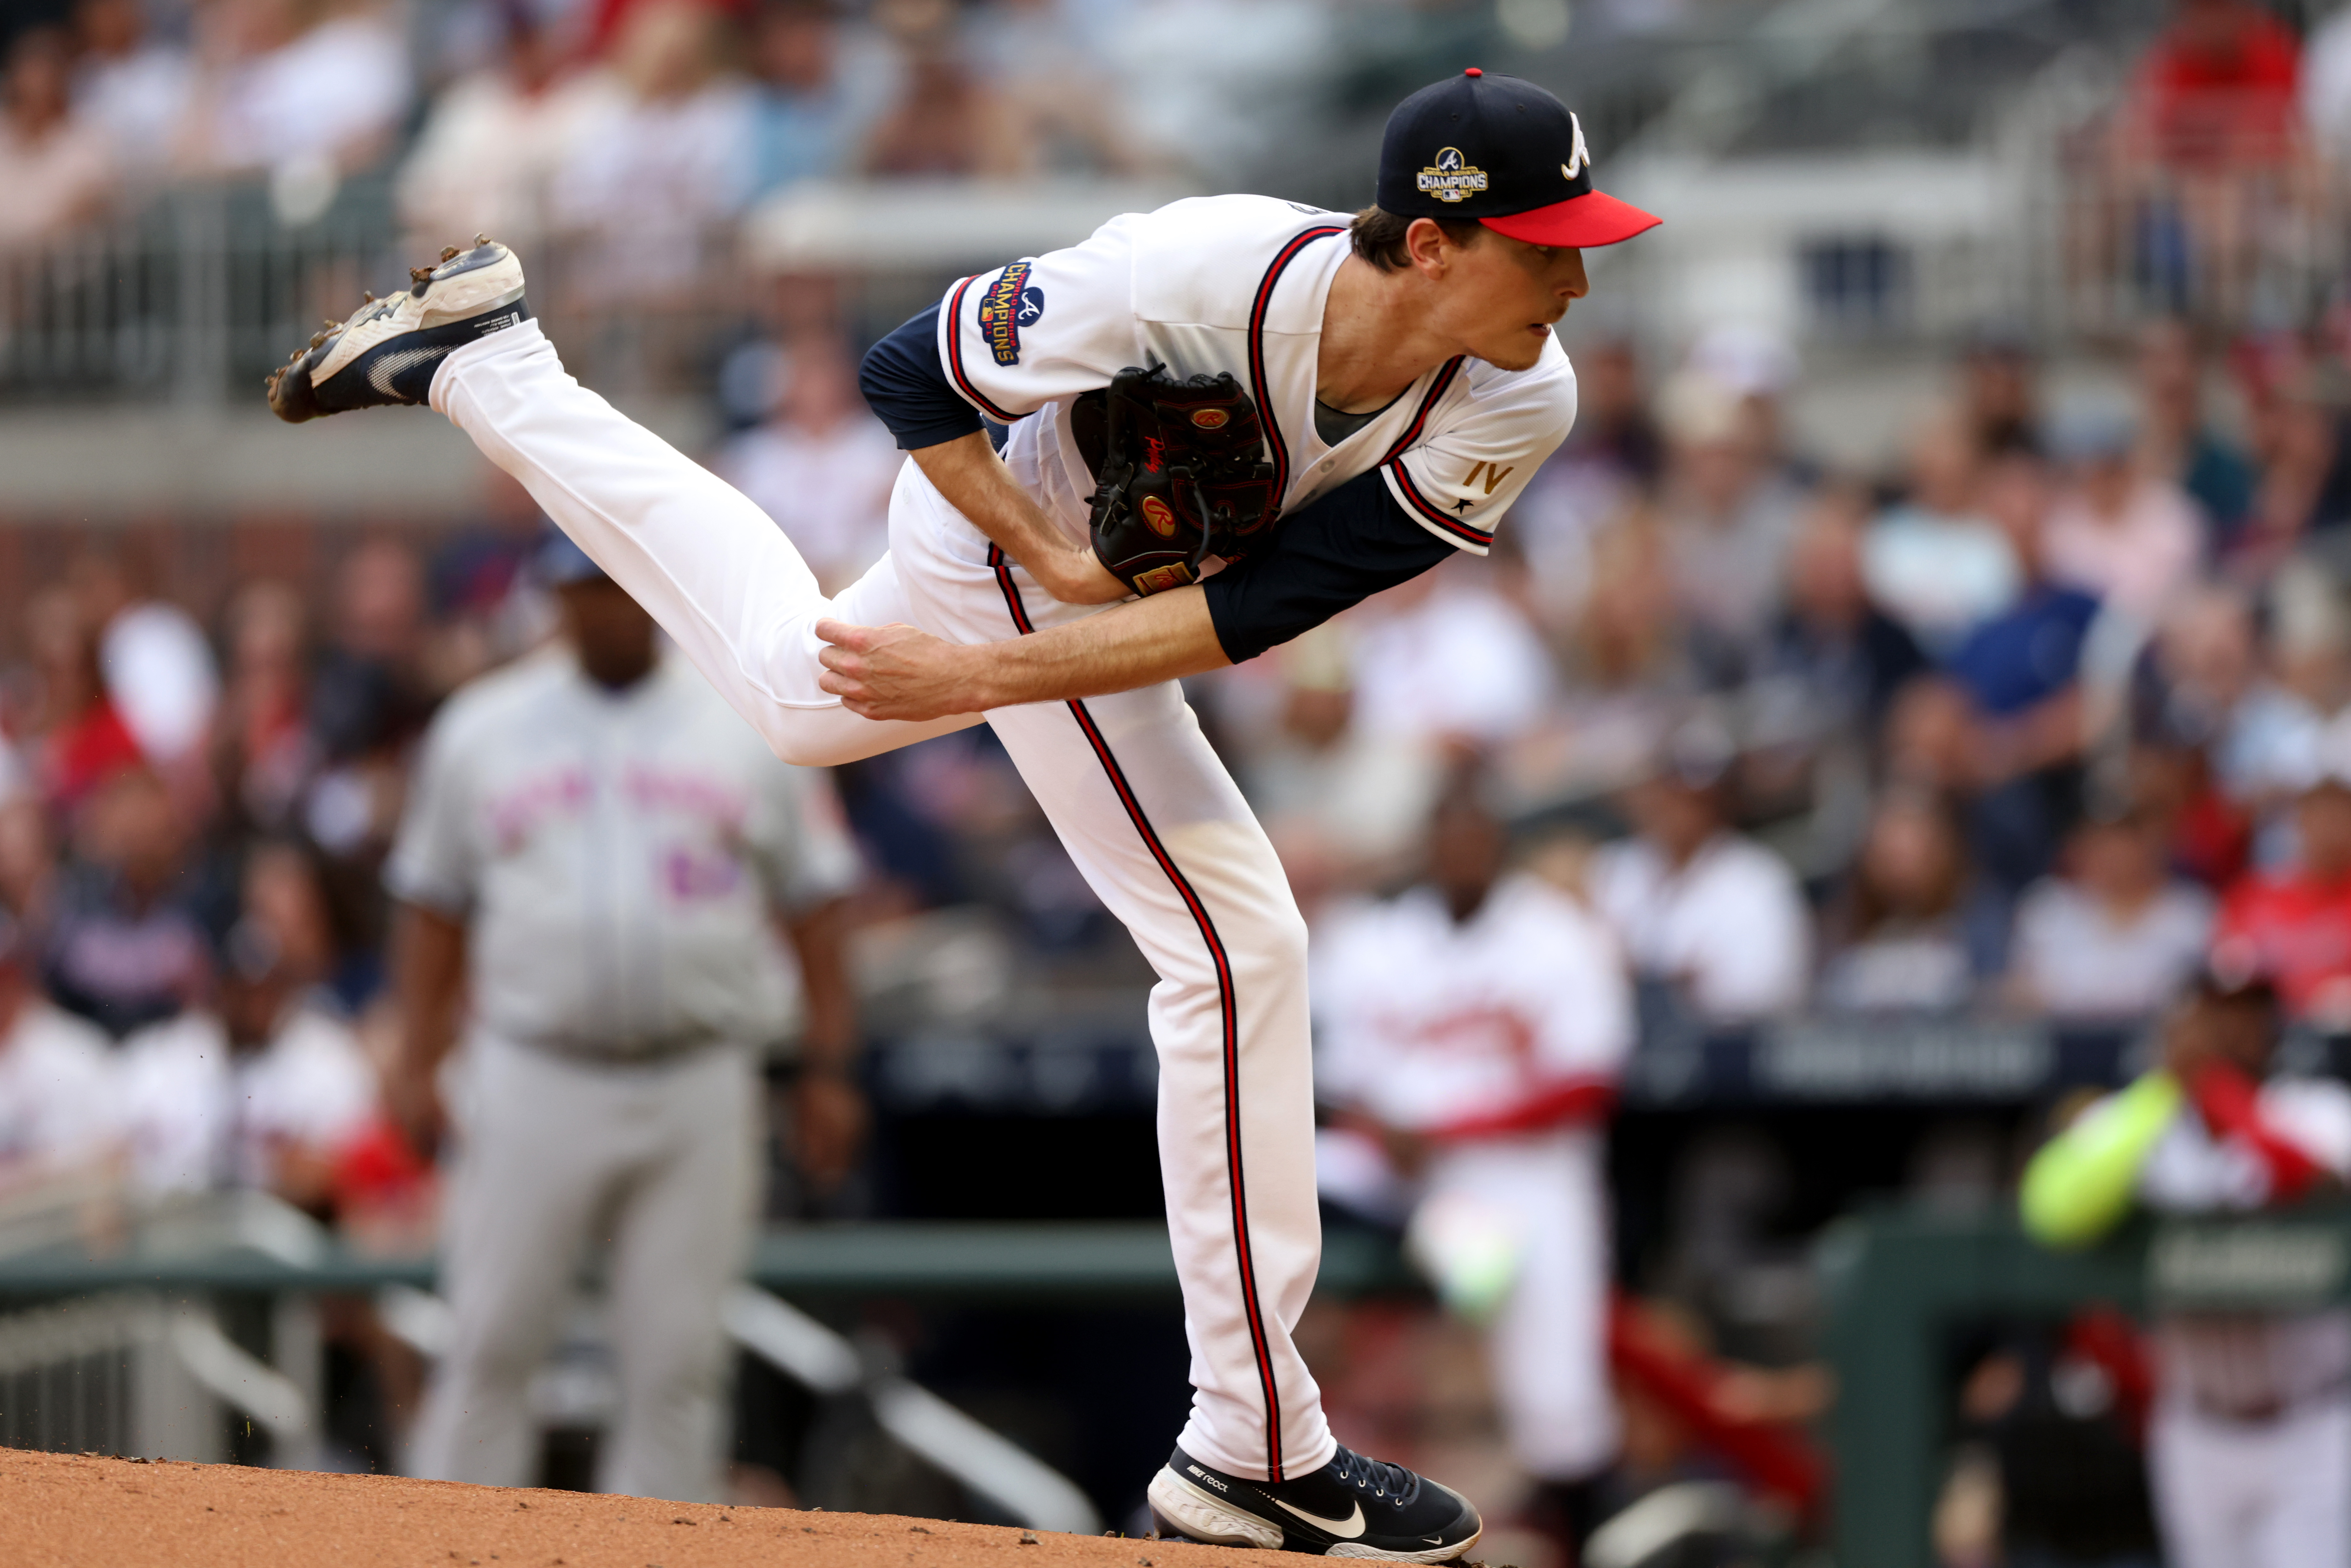 Atlanta ace Max Fried sidelined again, hopes to be back when